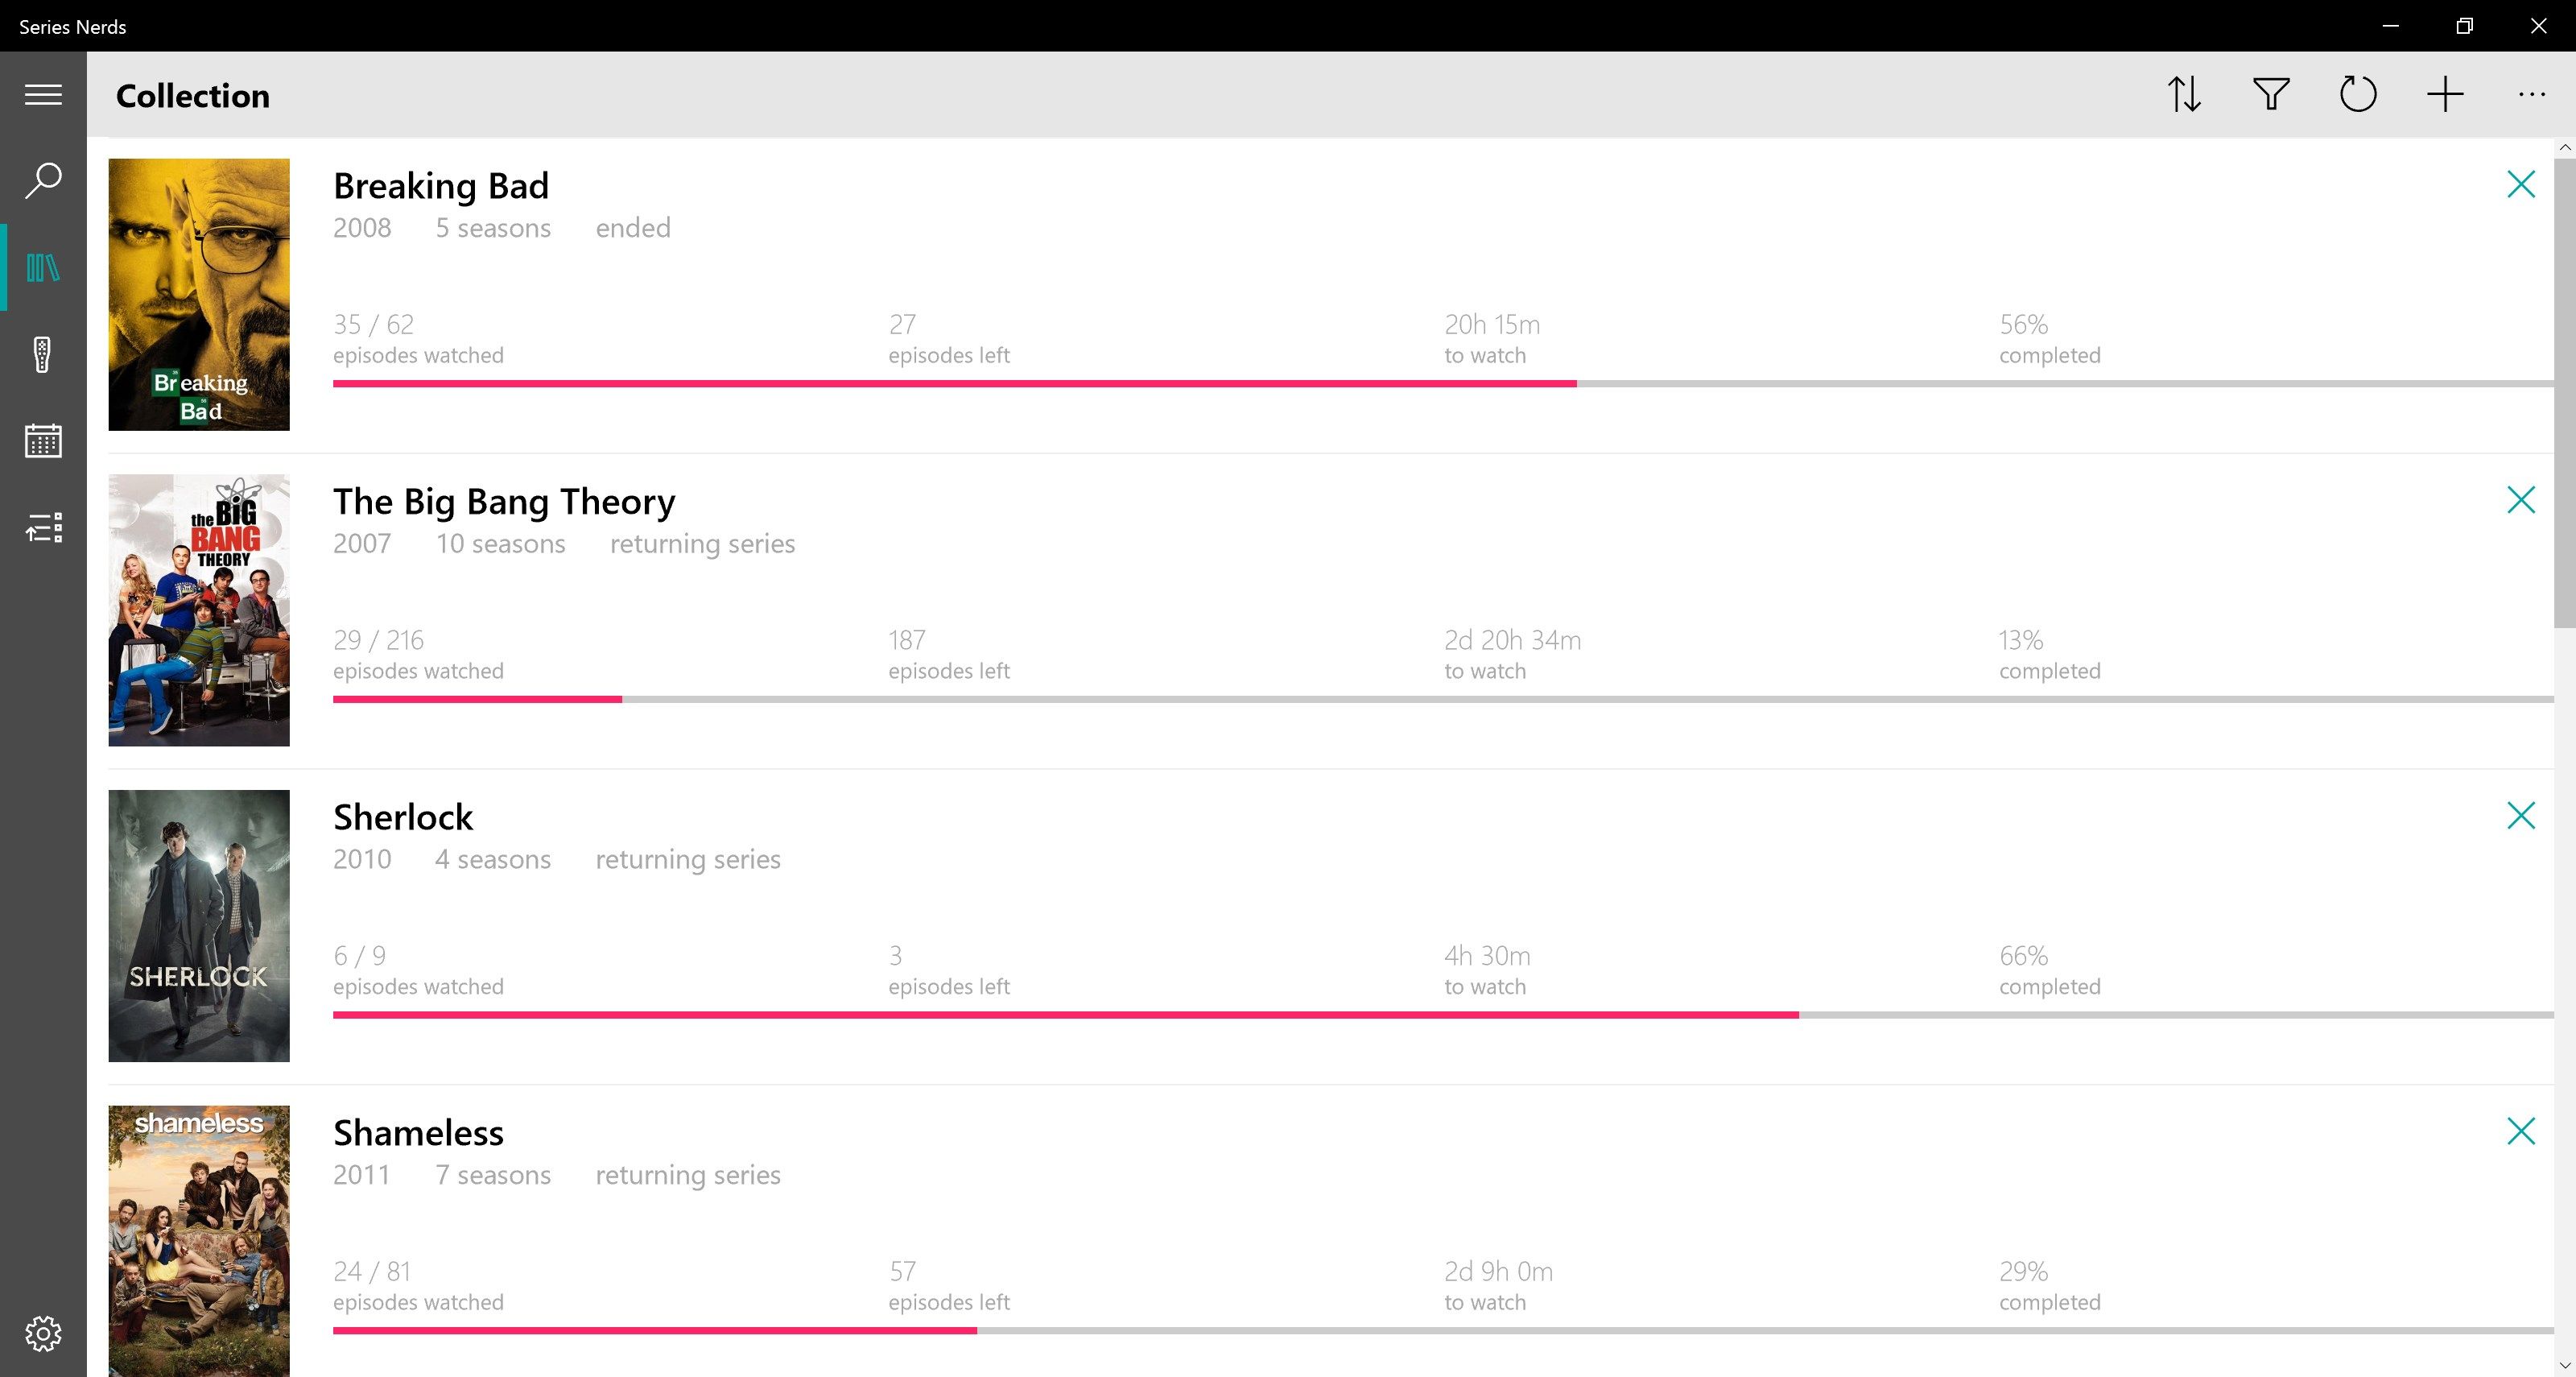 In the collection view you can monitor your progress with full sorting and filtering capabilities.